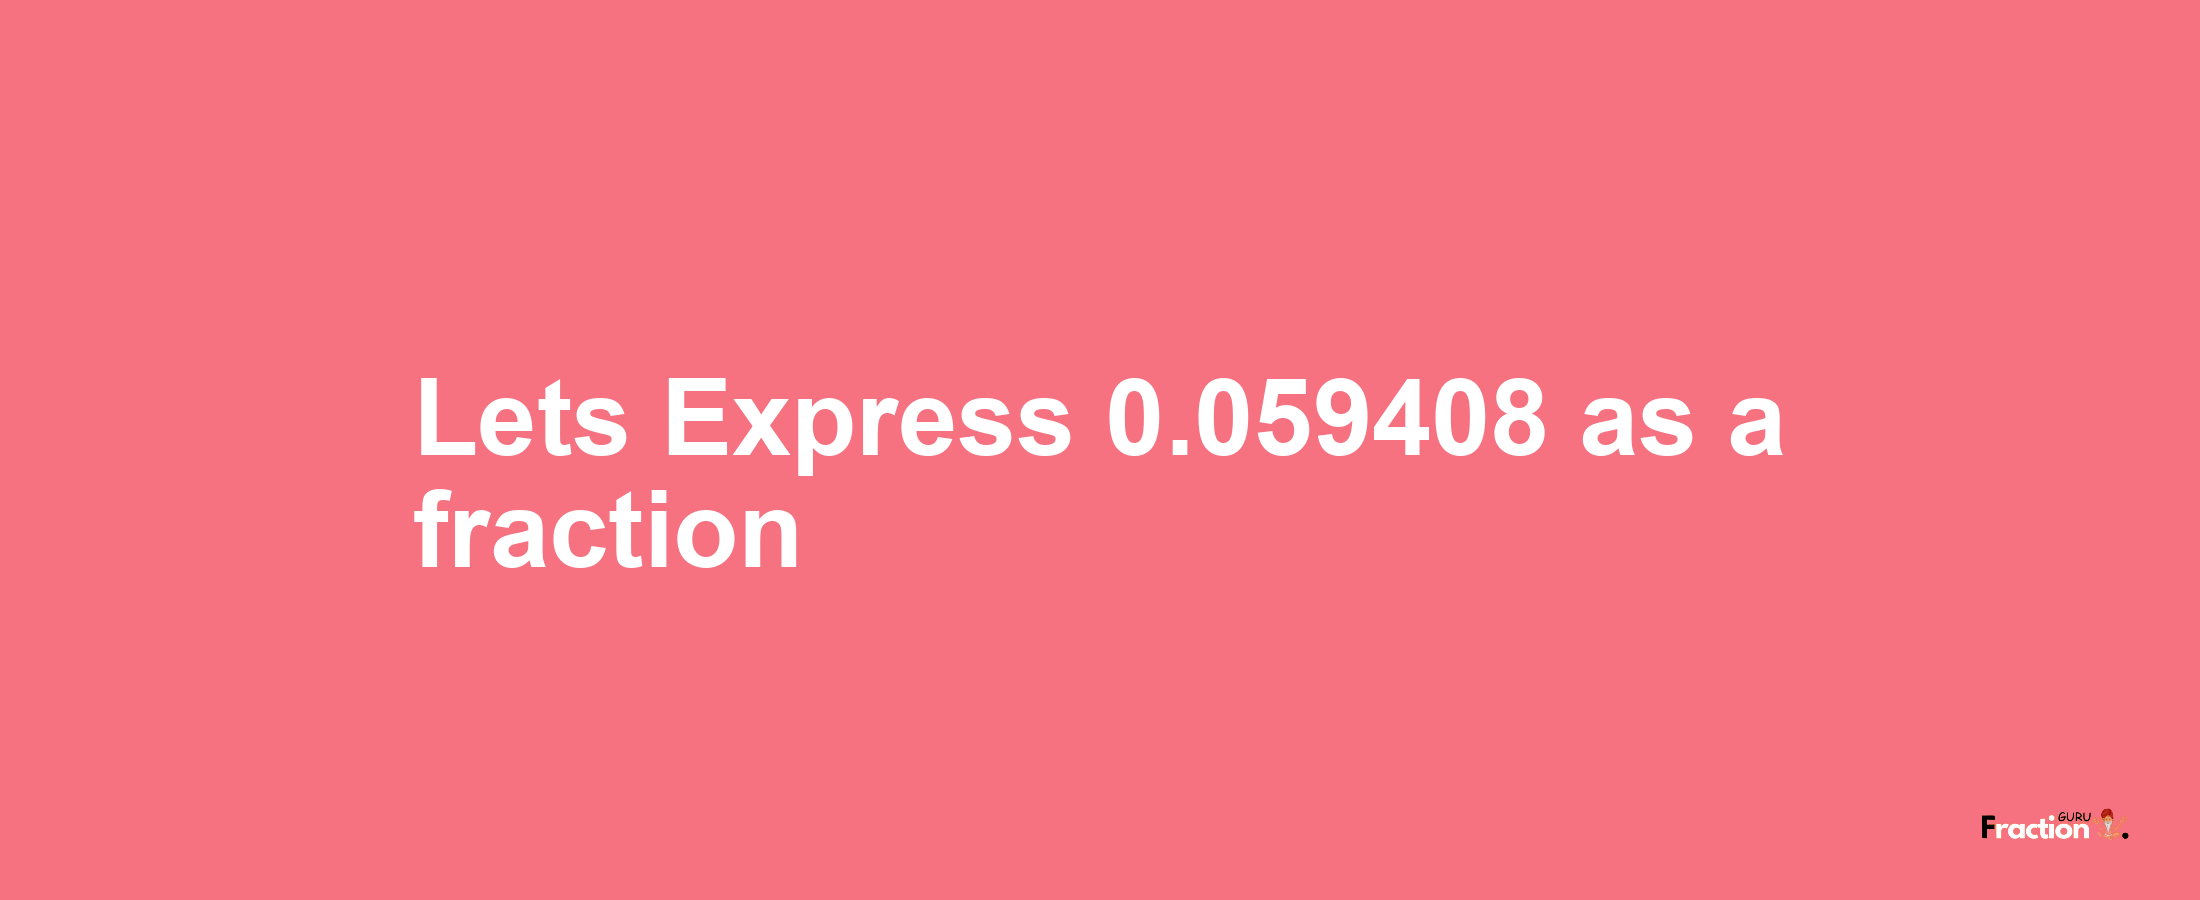 Lets Express 0.059408 as afraction